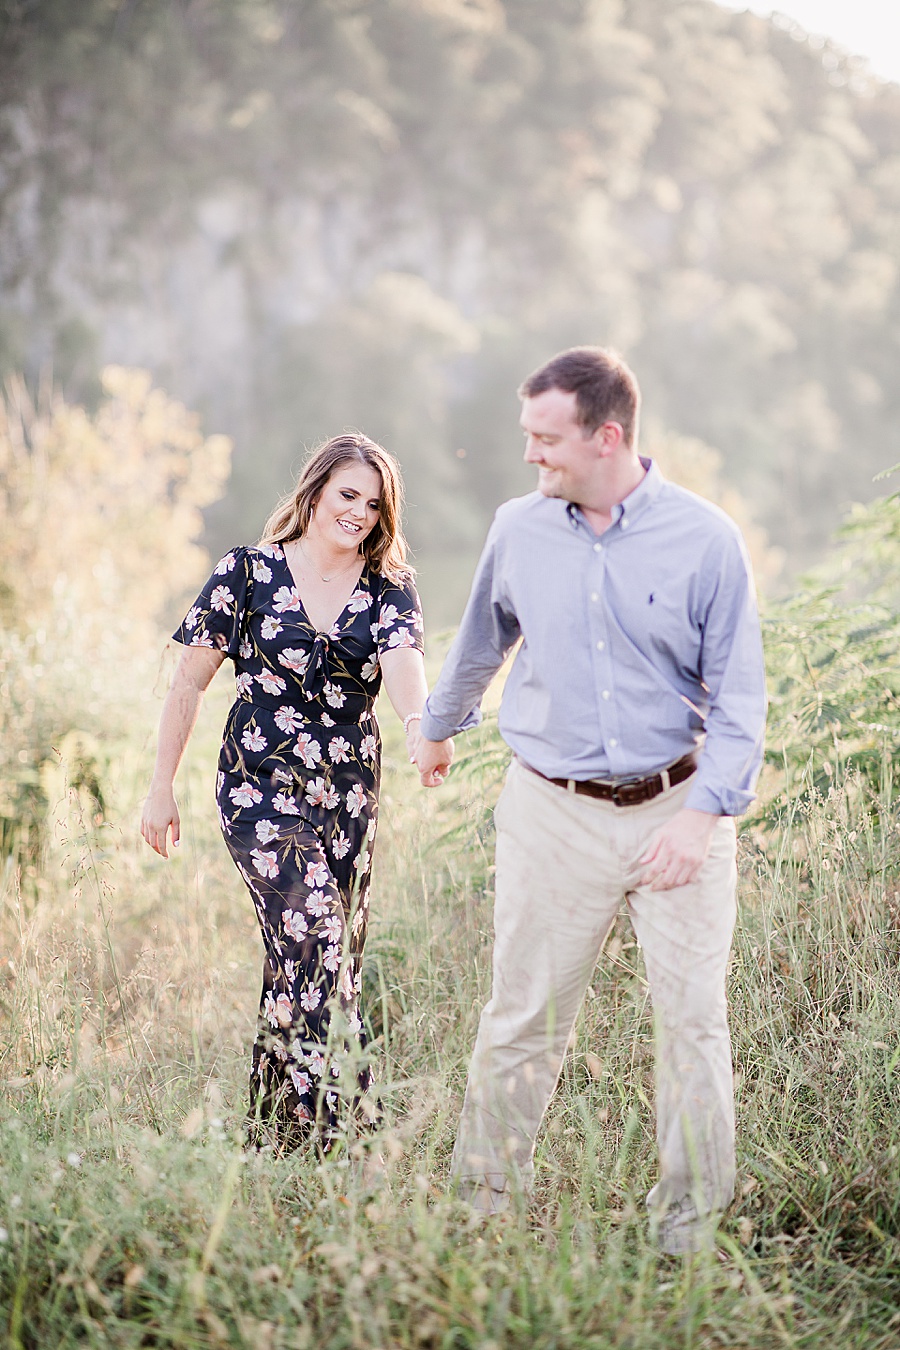 Golden hour at this Melton Hill engagement session by Knoxville Wedding Photographer, Amanda May Photos.